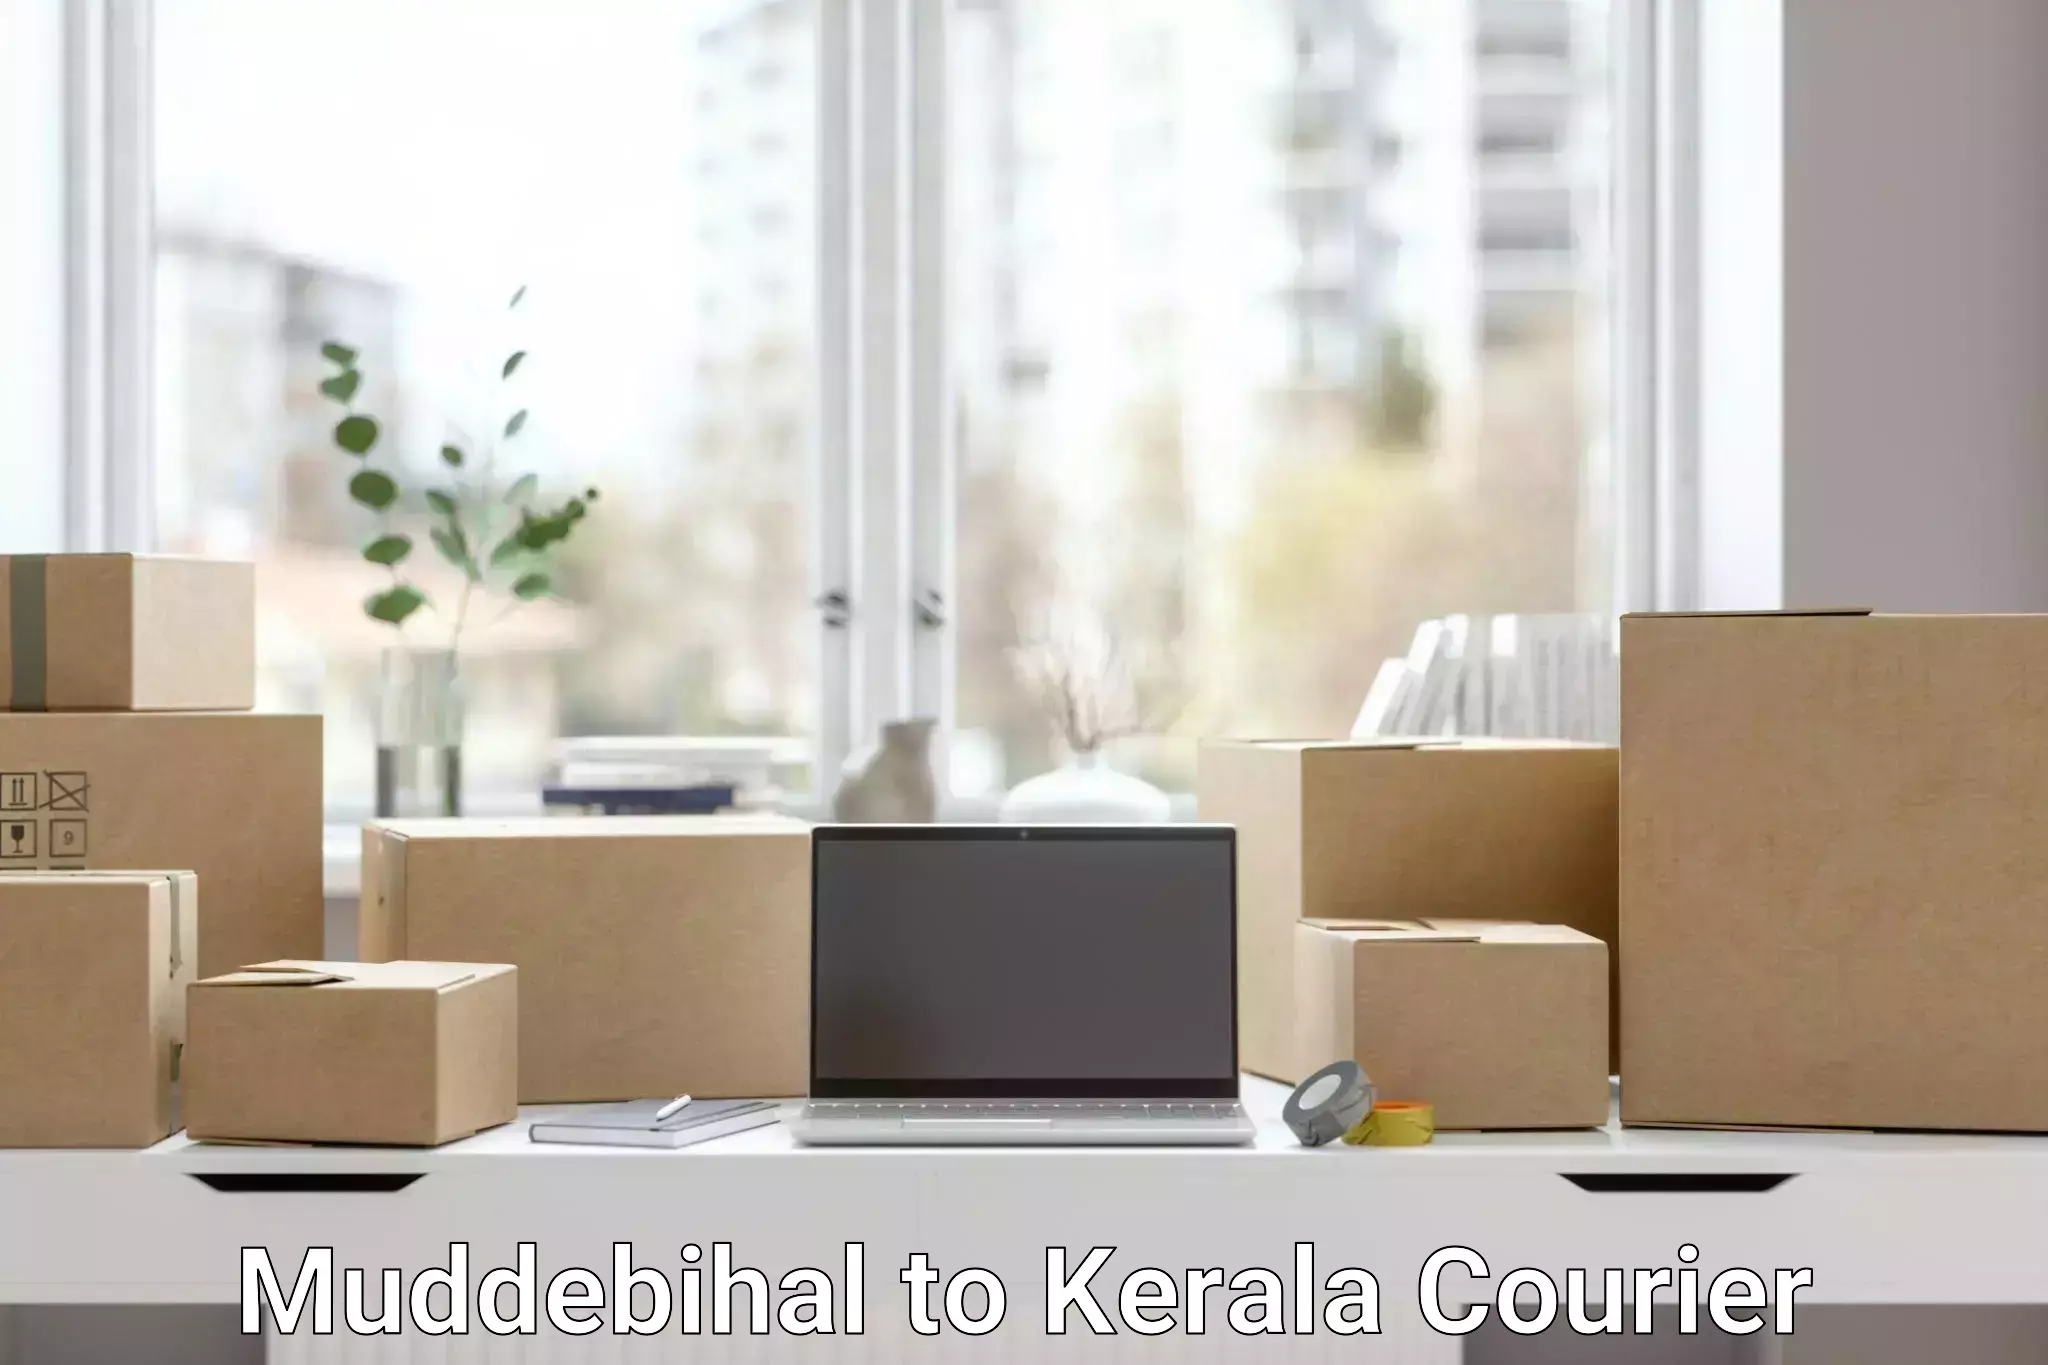 Cost-effective shipping solutions Muddebihal to Kerala